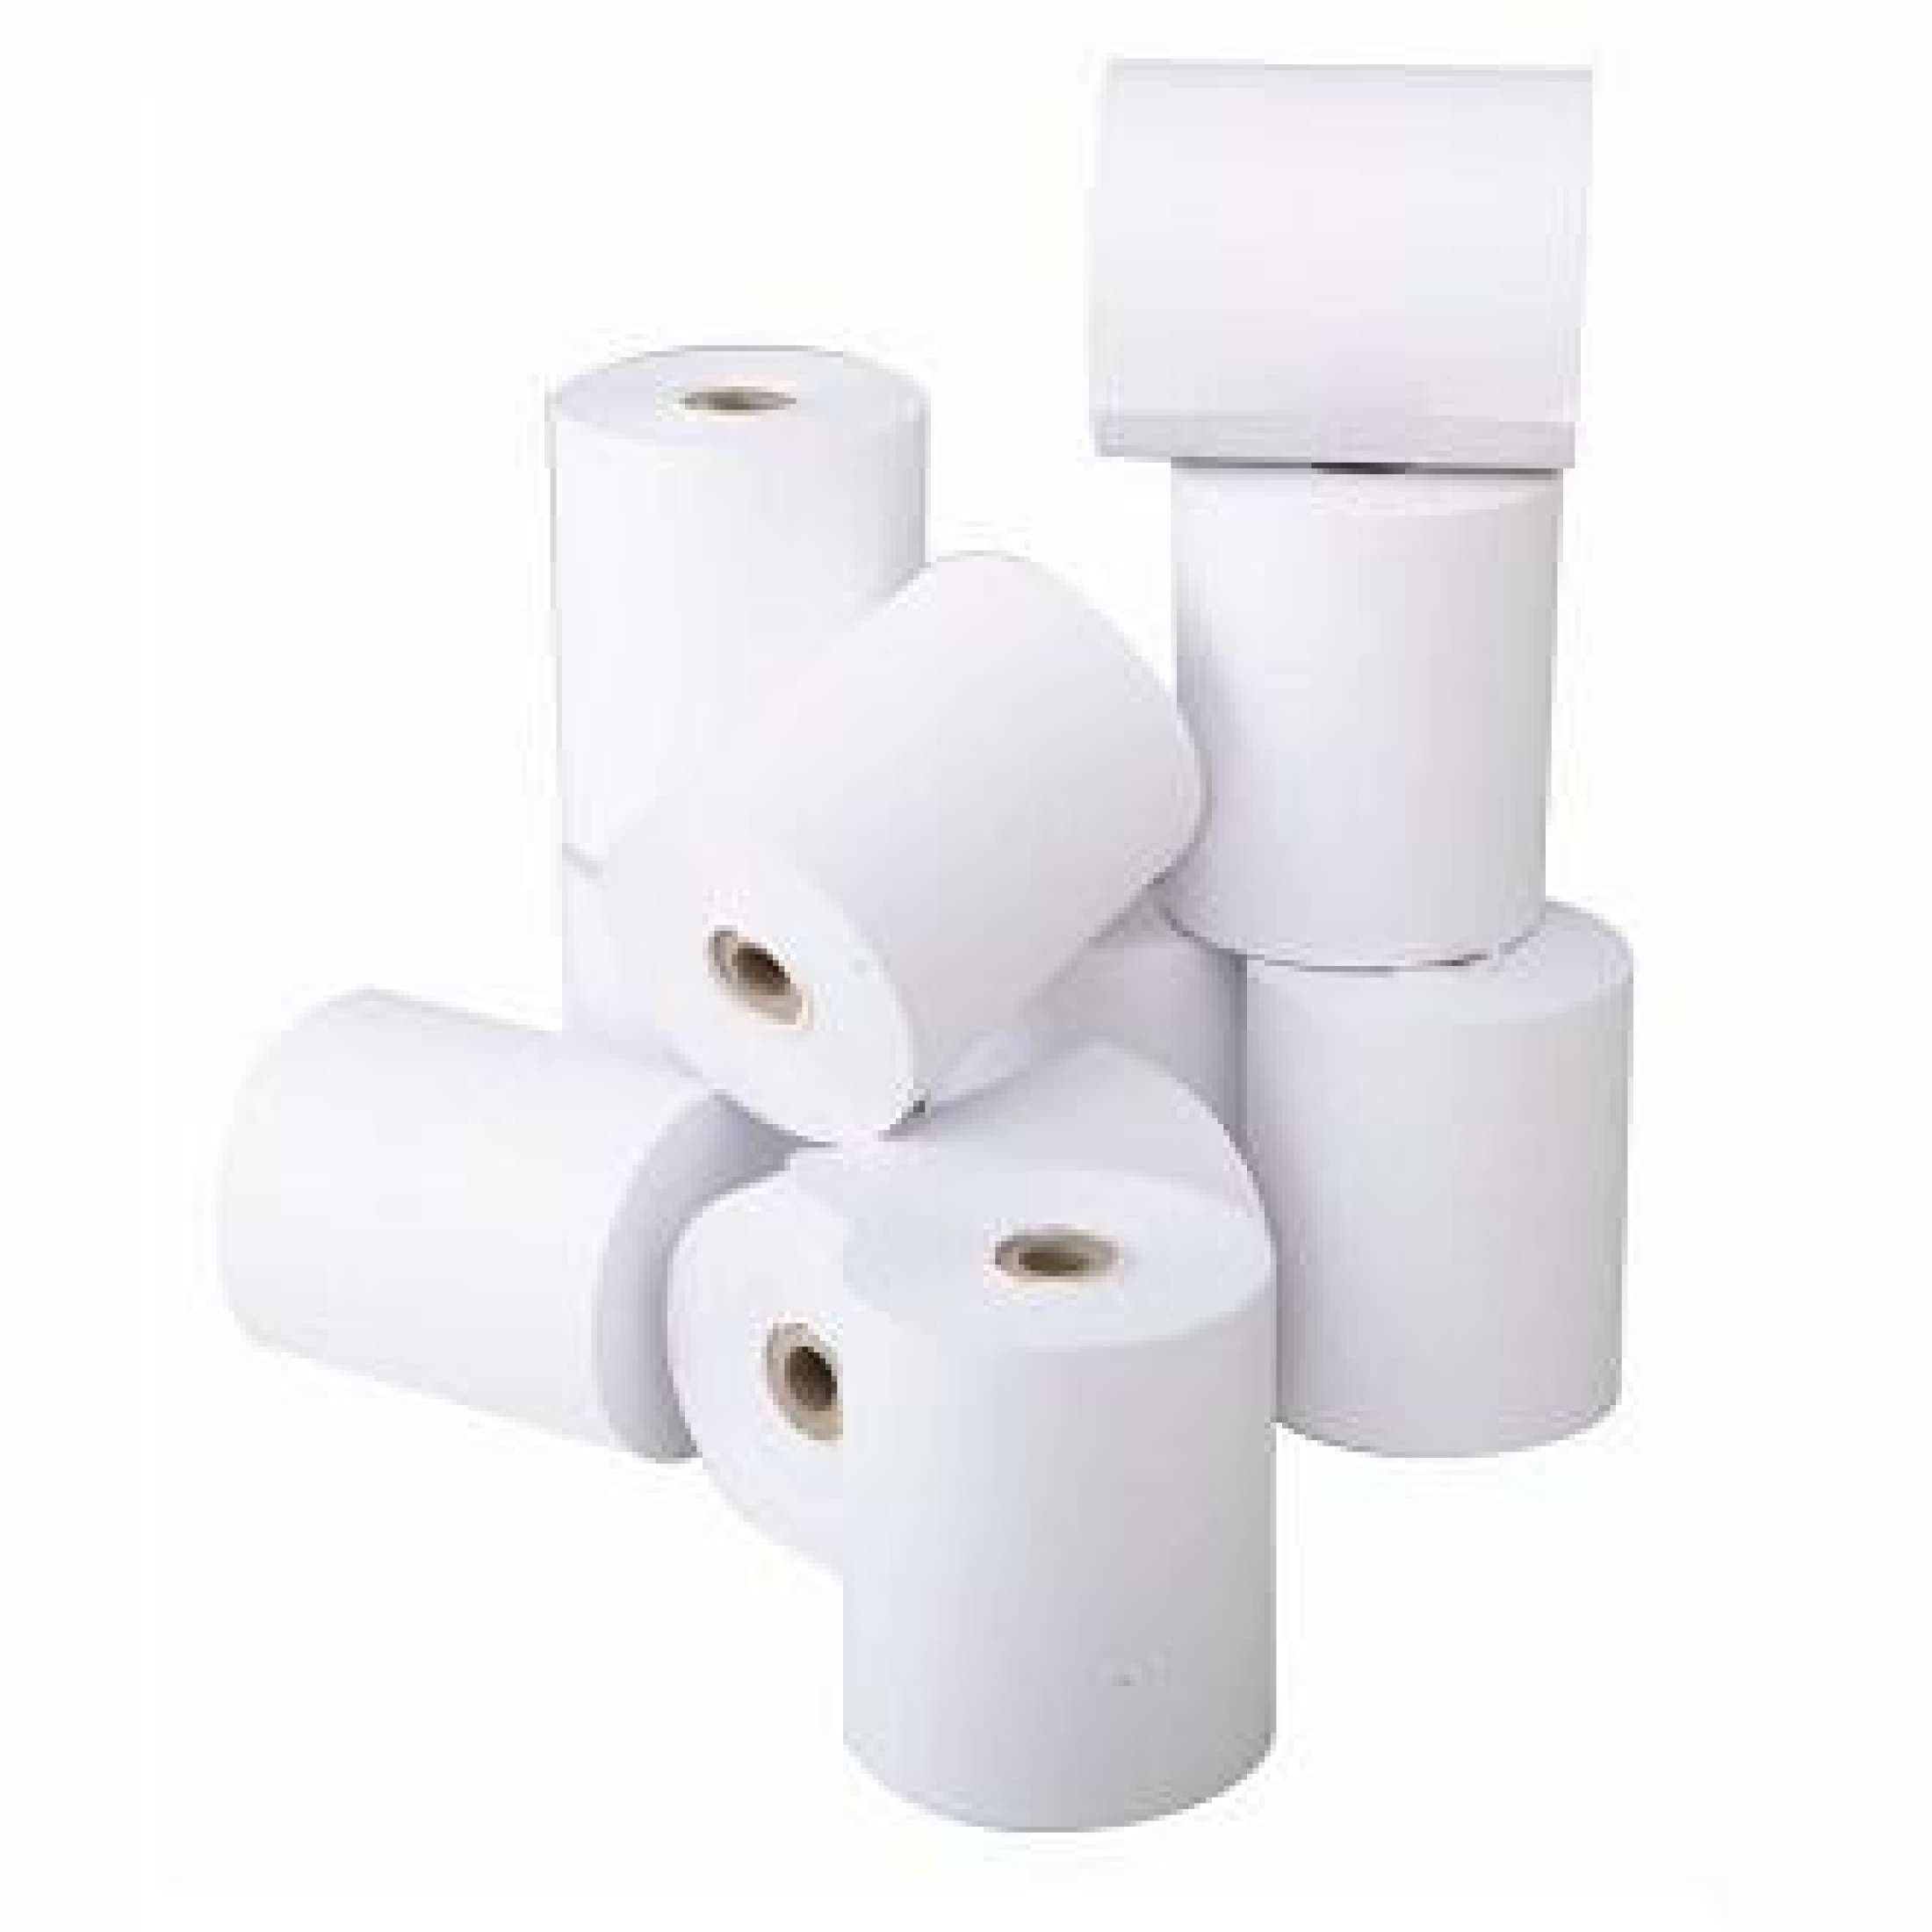 Thermal Roll 3X3 (40M) - White Single Piece